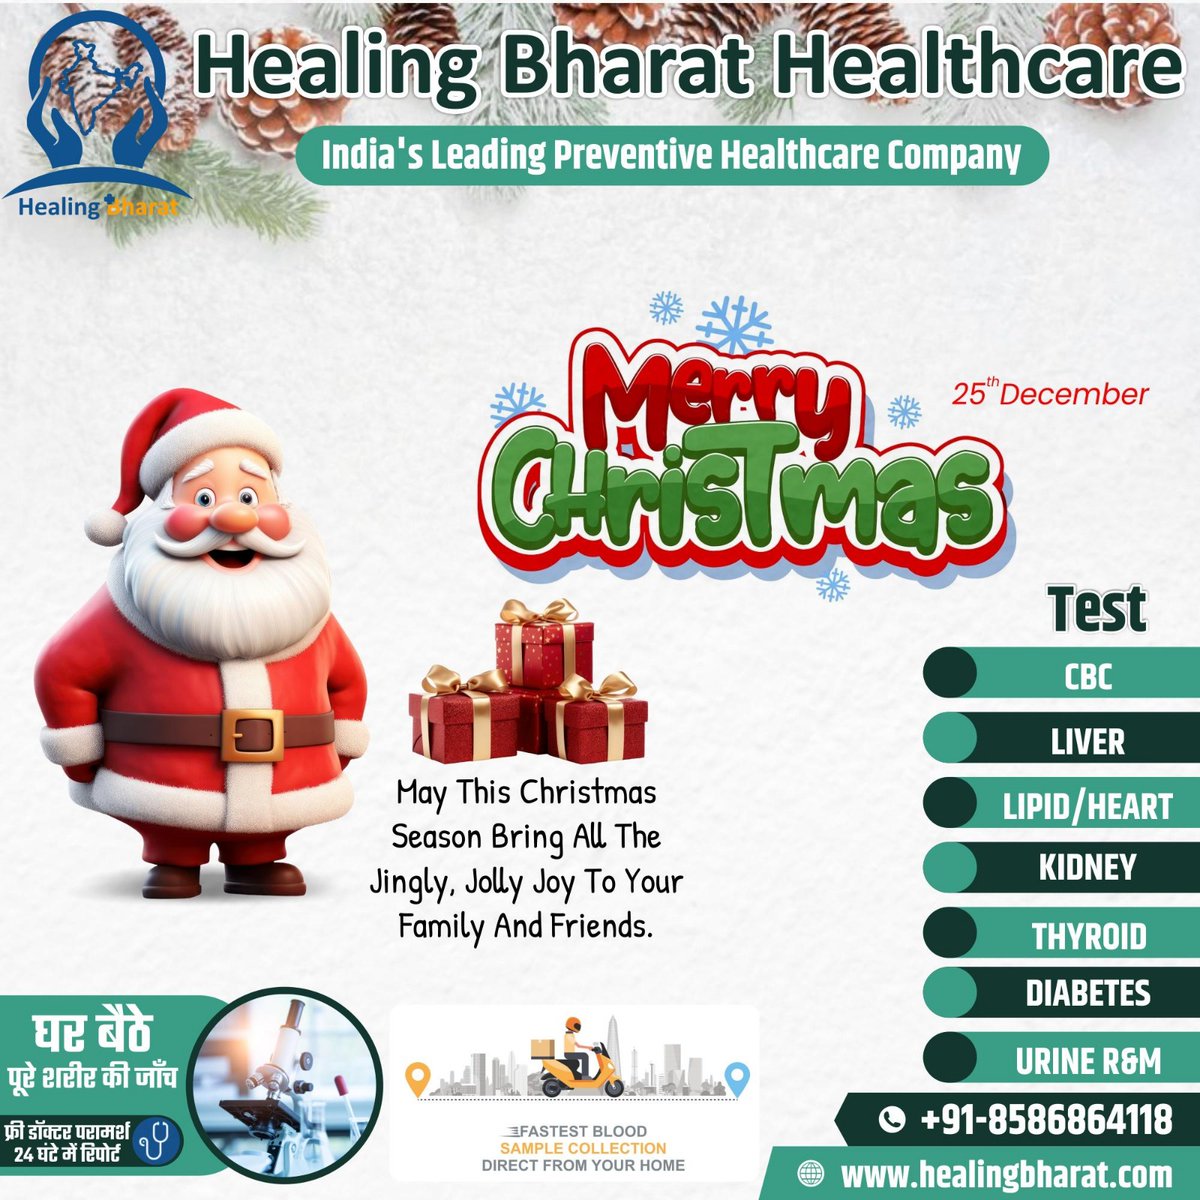 #HealingBharat wishes you all a Merry Christmas! May this Christmas bring joy to your heart and happiness to your home. #merrychristmas #celebrations #christmas2023 #festival #FestiveSeason #HolidaySeason2023 #NewYear2024